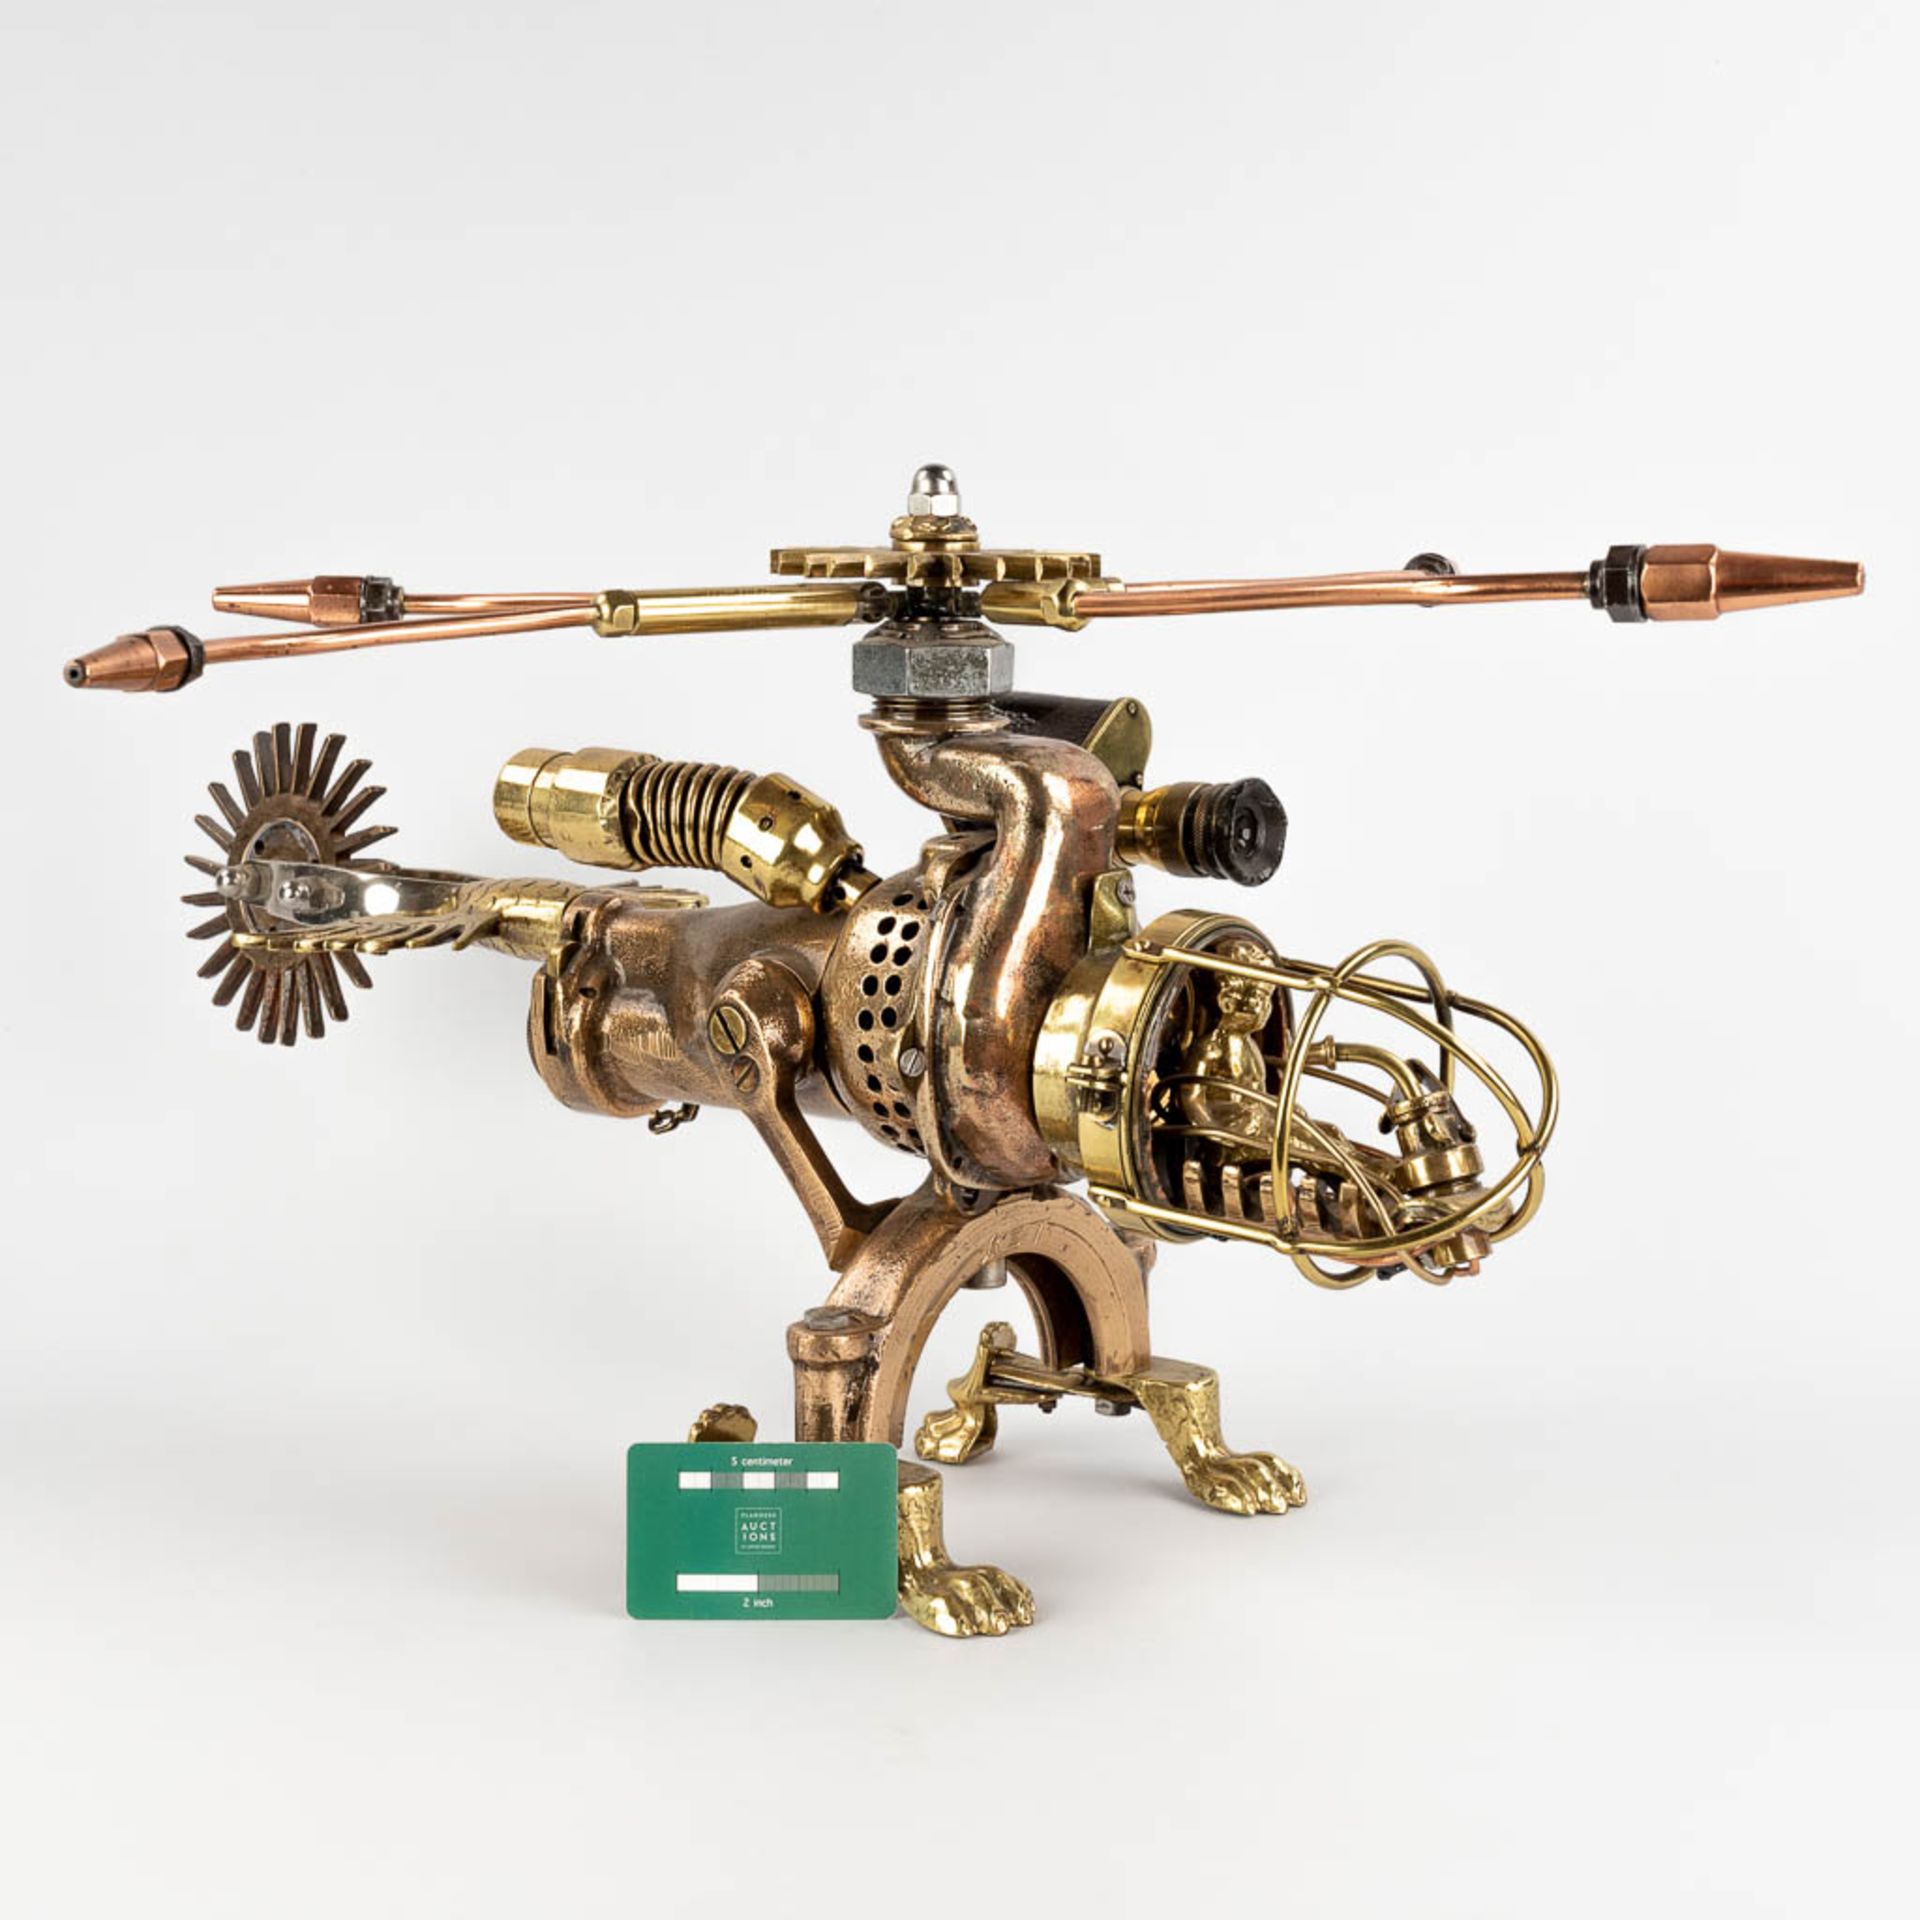 Dirk 'KEZANTI' DEWULF (1973) 'Helicopter' mixed media. (D:63 x W:53 x H:37 cm) - Image 2 of 17